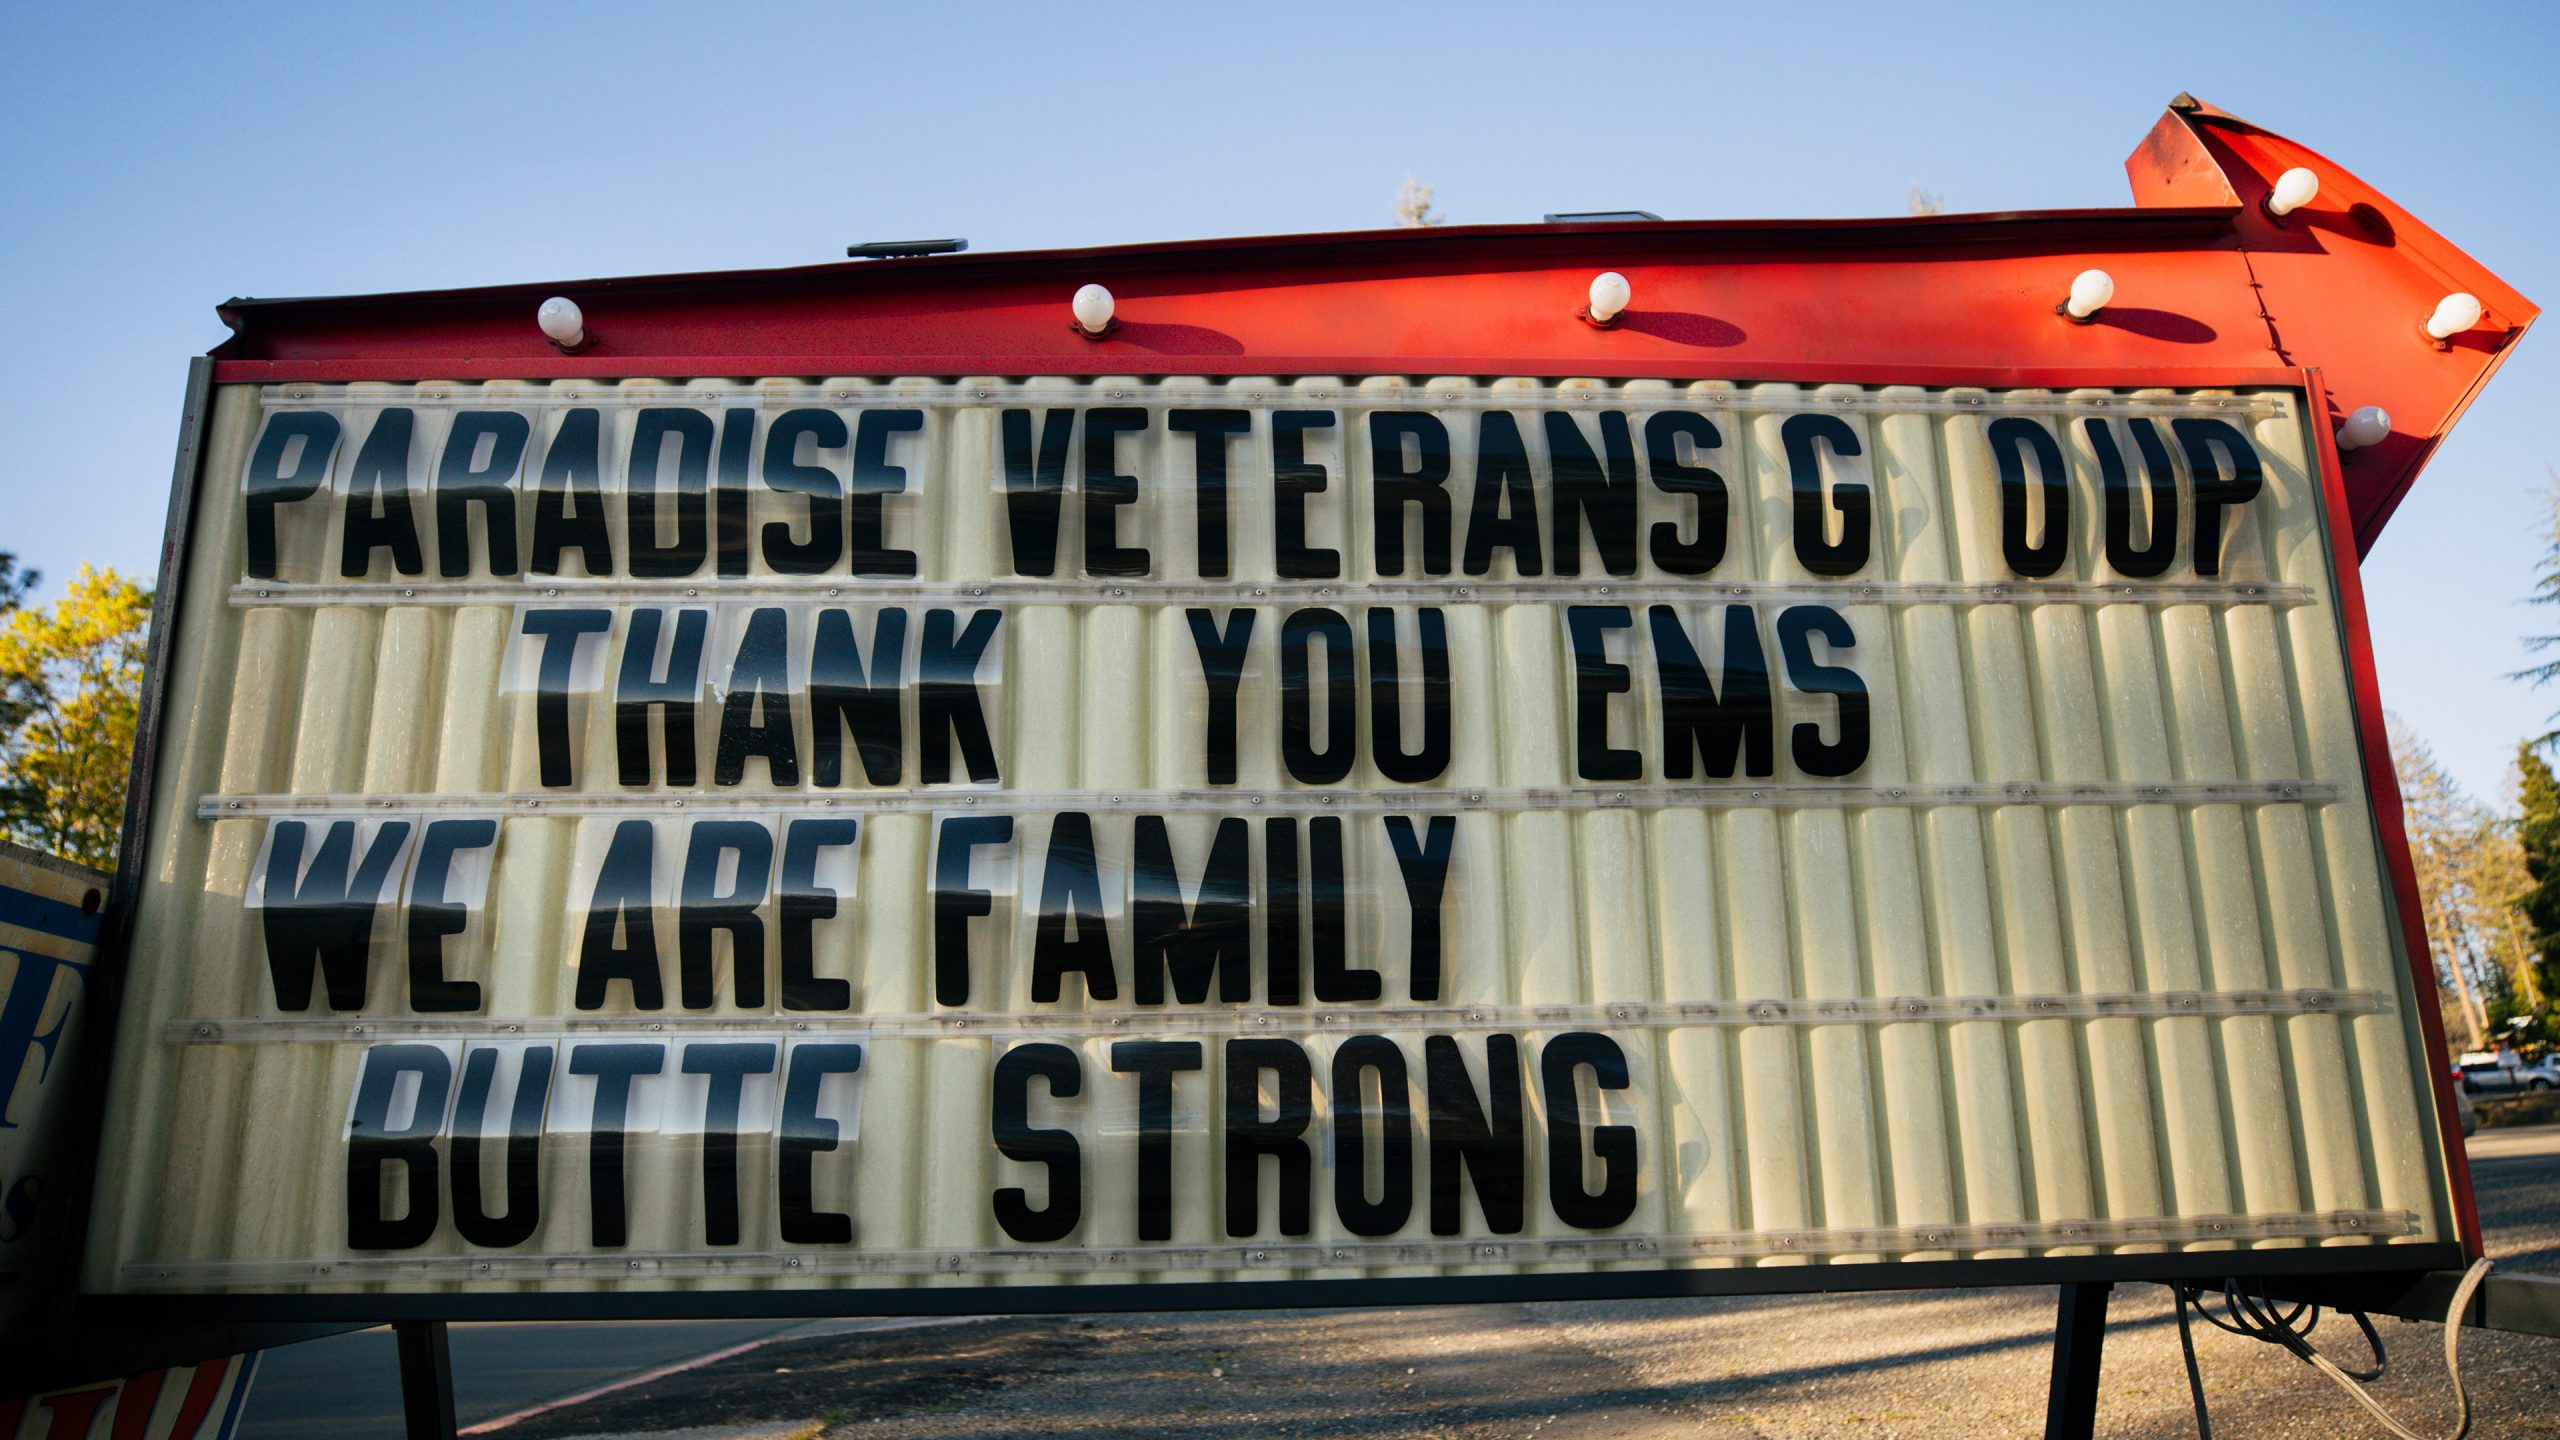 A sign in Paradise, CA, reads, "Paradise Veterans G[r]oup Thank You EMS We Are Family Butte Strong." Photo by Joe Johnston.